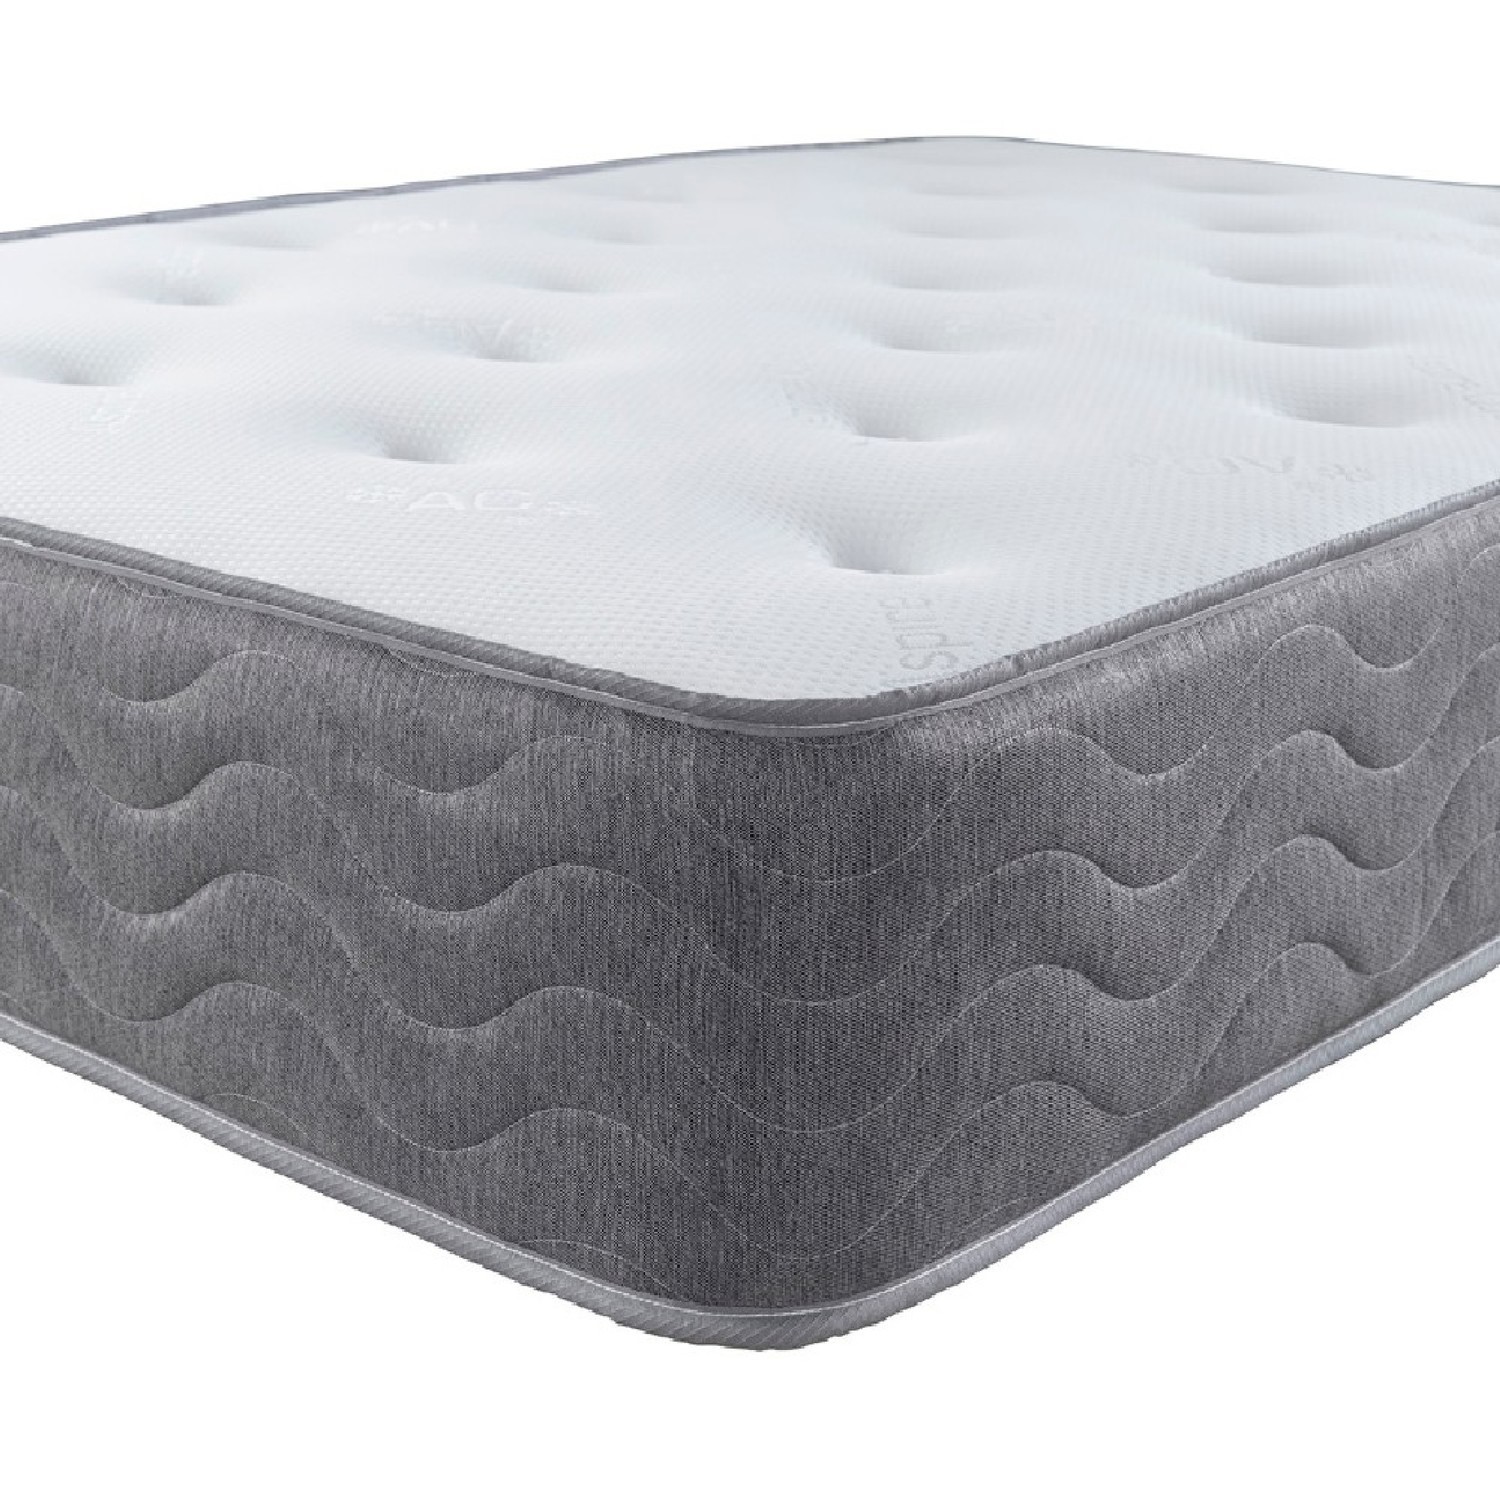 Aspire furniture air conditioned natural 1000 pocket spring mattress -double